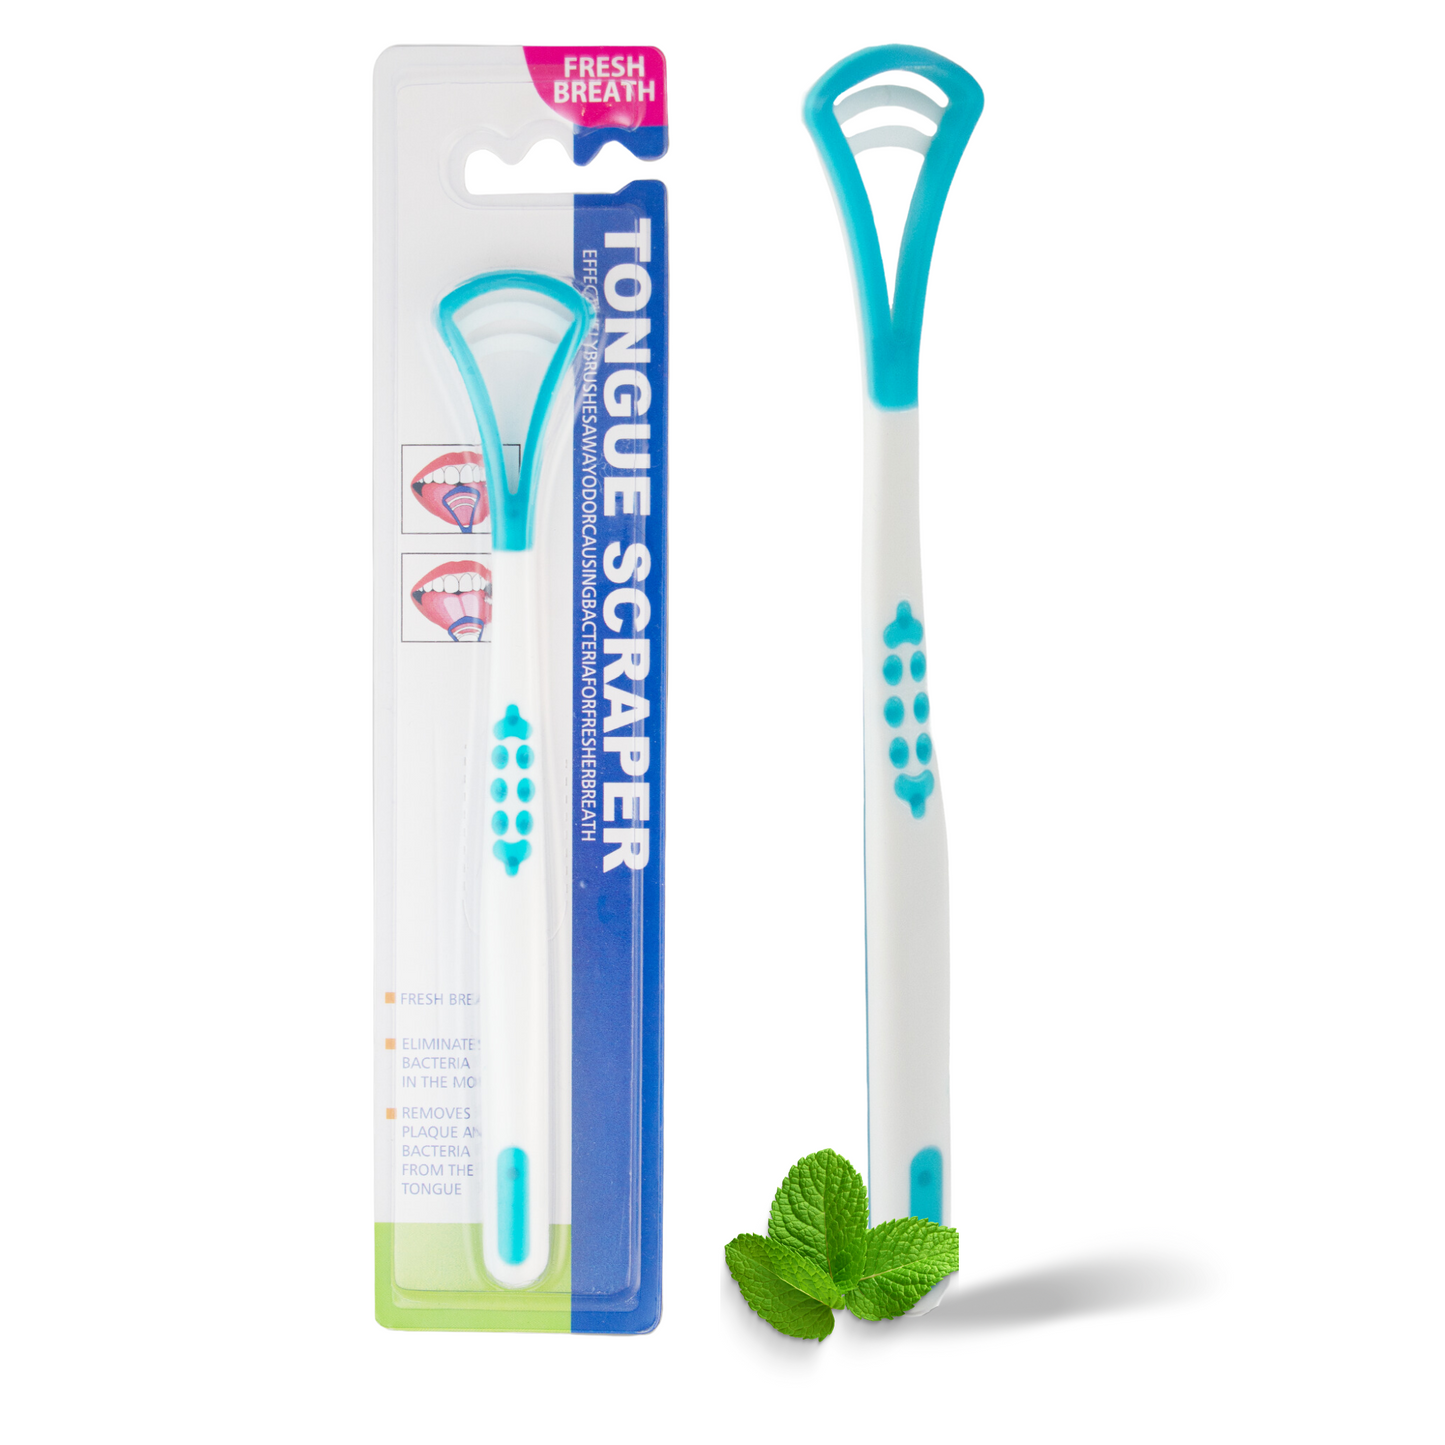 Tongue Scraper for Fresh Breath Perfect Tongue Scraper for Adults and Kids, Enhance Your Oral Hygiene with Tongue Brushes, Scrapers for Bad Breath Treatment